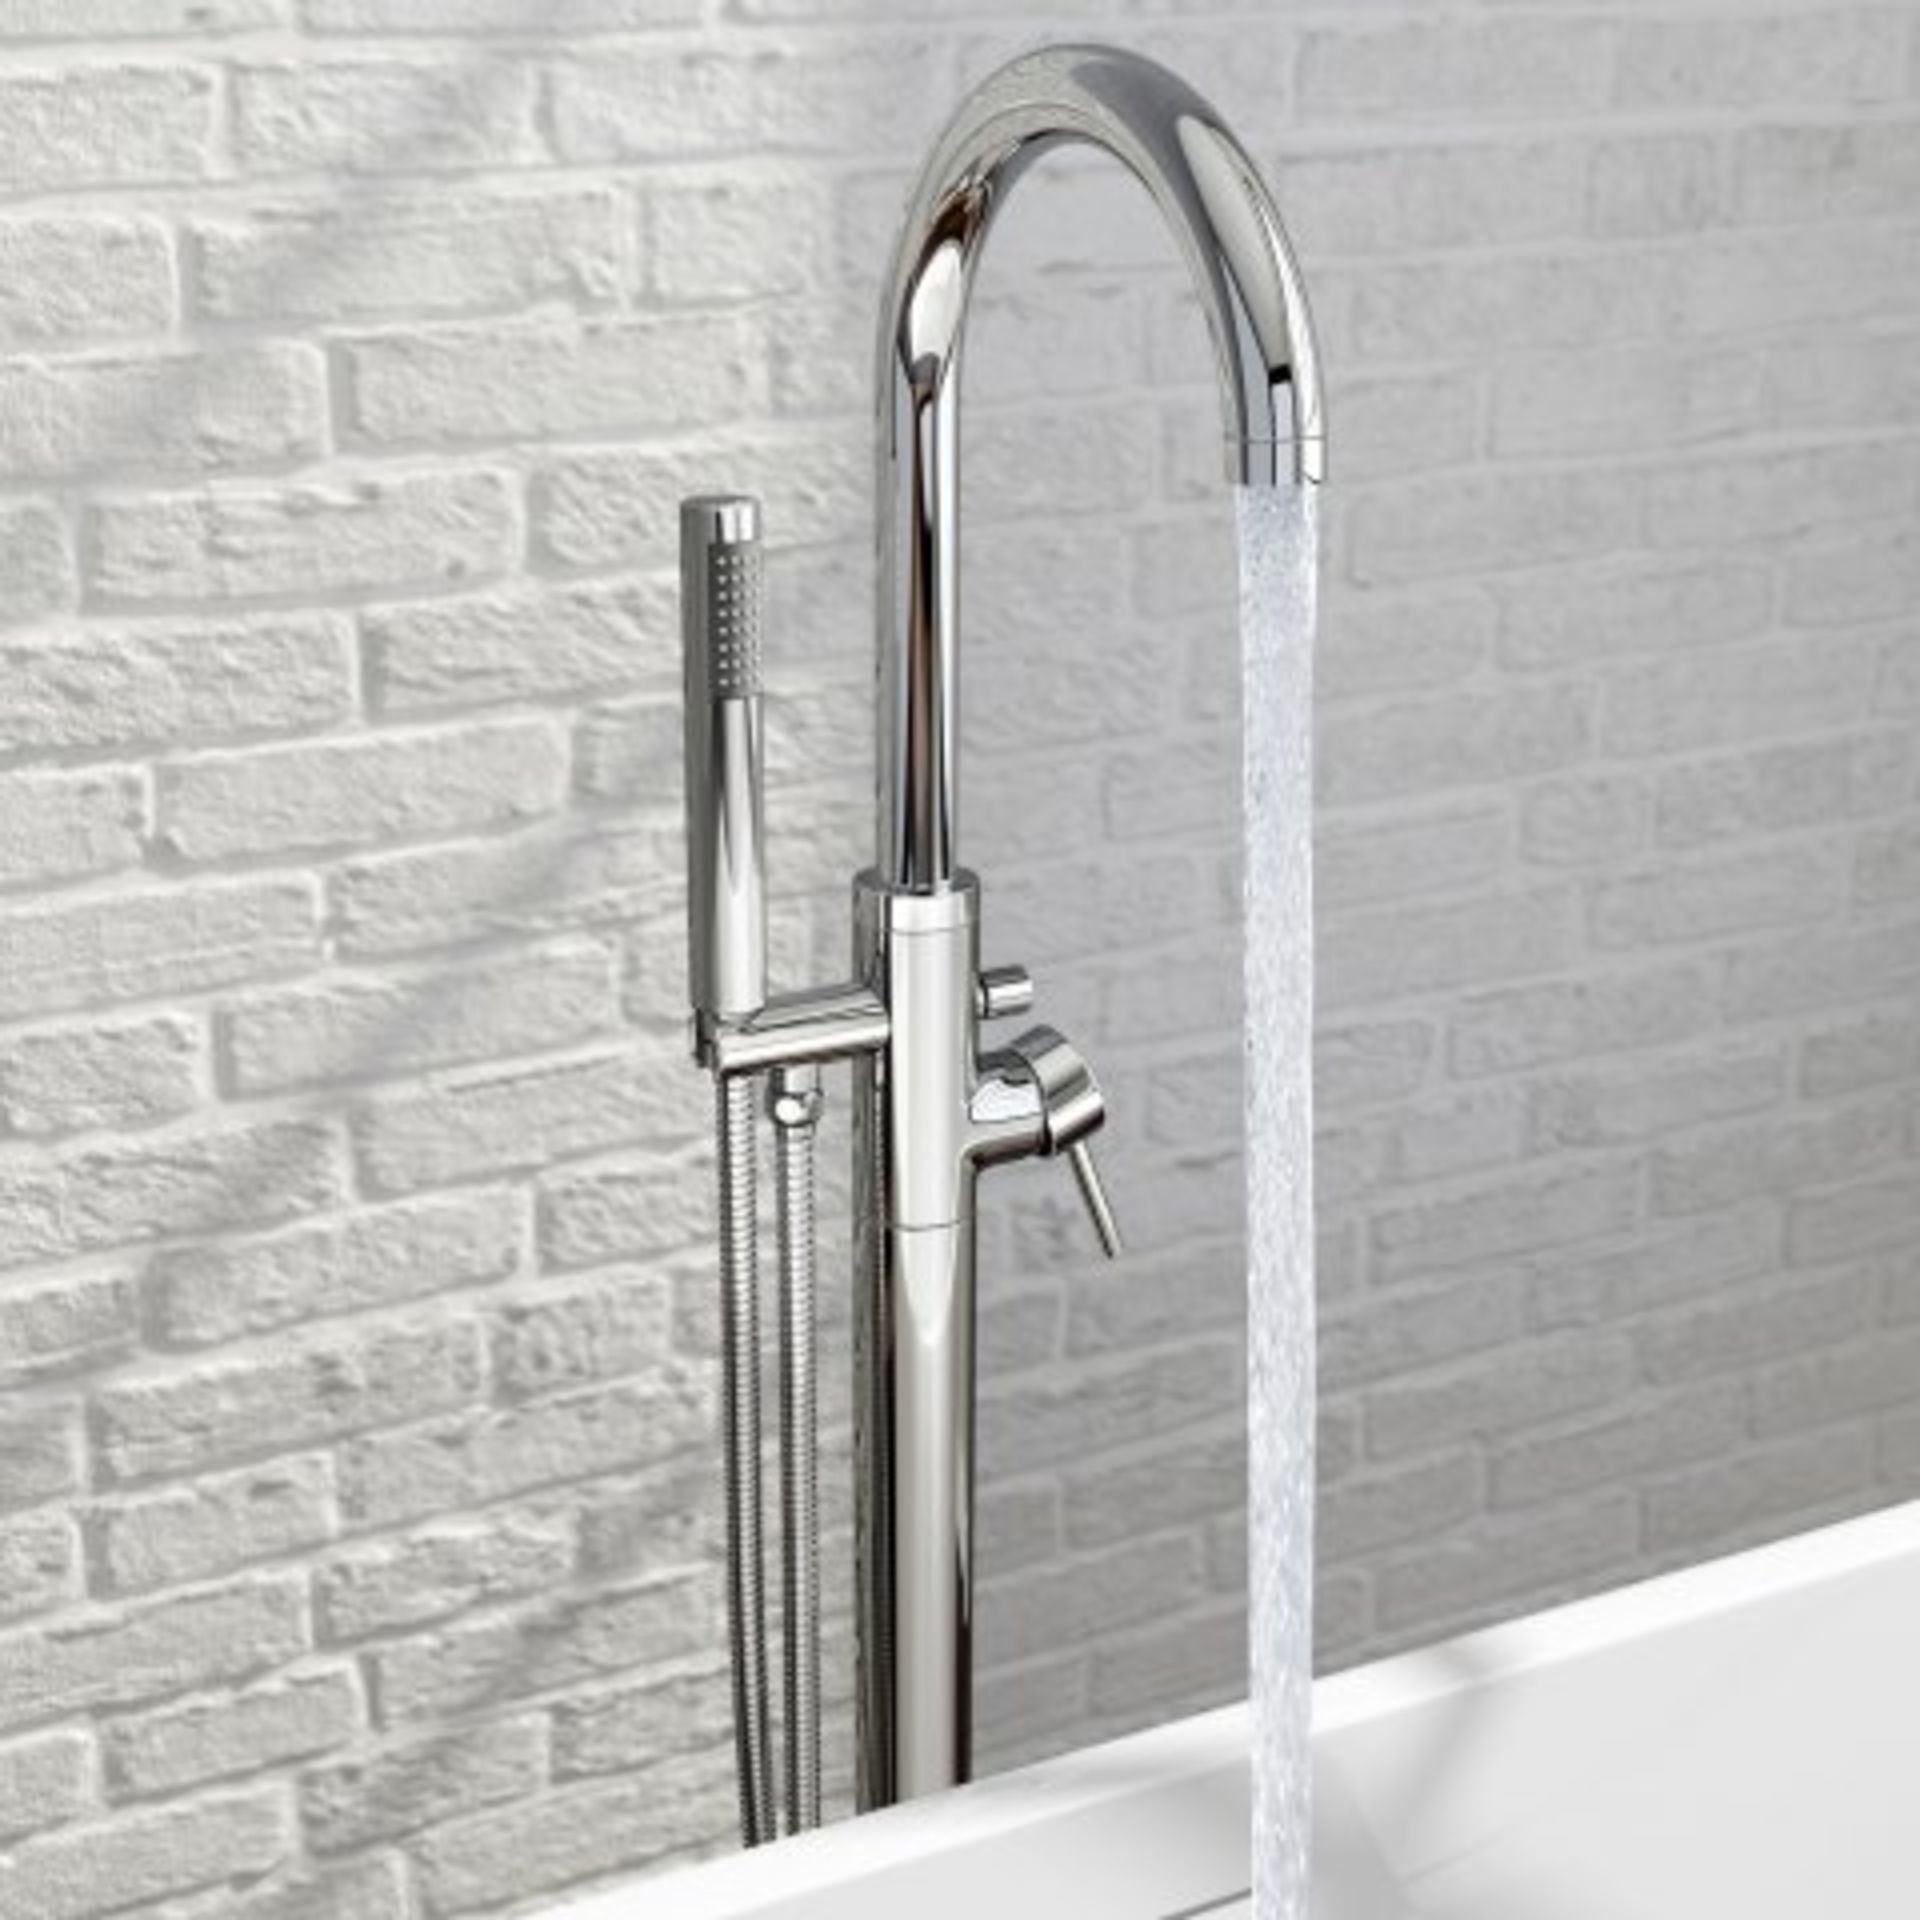 (20) Gladstone II Freestanding Bath Mixer Tap with Hand Held Shower Head Simplicity at its best: Our - Image 2 of 5